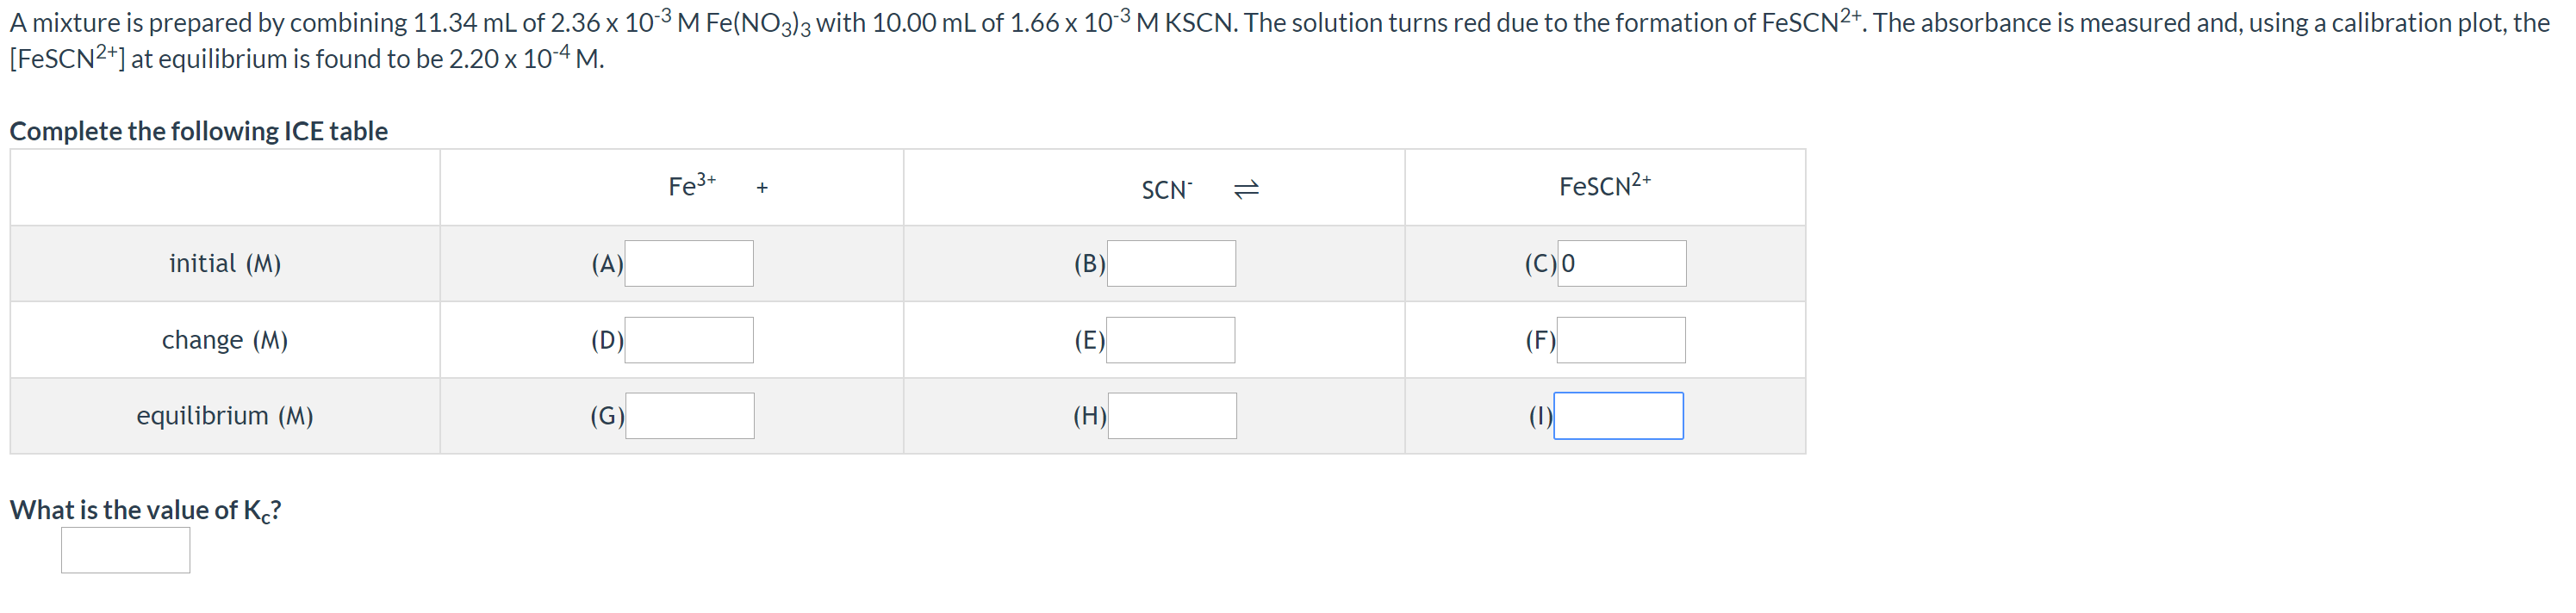 A mixture is prepared by combining 11.34 mL of 2.36 x 103 M Fe(NO3)3 with 10.00 mL of 1.66 x 10-3 M KSCN. The solution turns red due to the formation of FeSCN2+. The absorbance is measured and, using a calibration plot, the
[FESCN2*] at equilibrium is found to be 2.20 x 10-4 M.
Complete the following ICE table
Fe3+
SCN
1t
FESCN2+
initial (M)
(A)
(B)
(C)0
change (M)
(D)
(E)
(F)
equilibrium (M)
(G)
(H)
(1)
What is the value of K?
